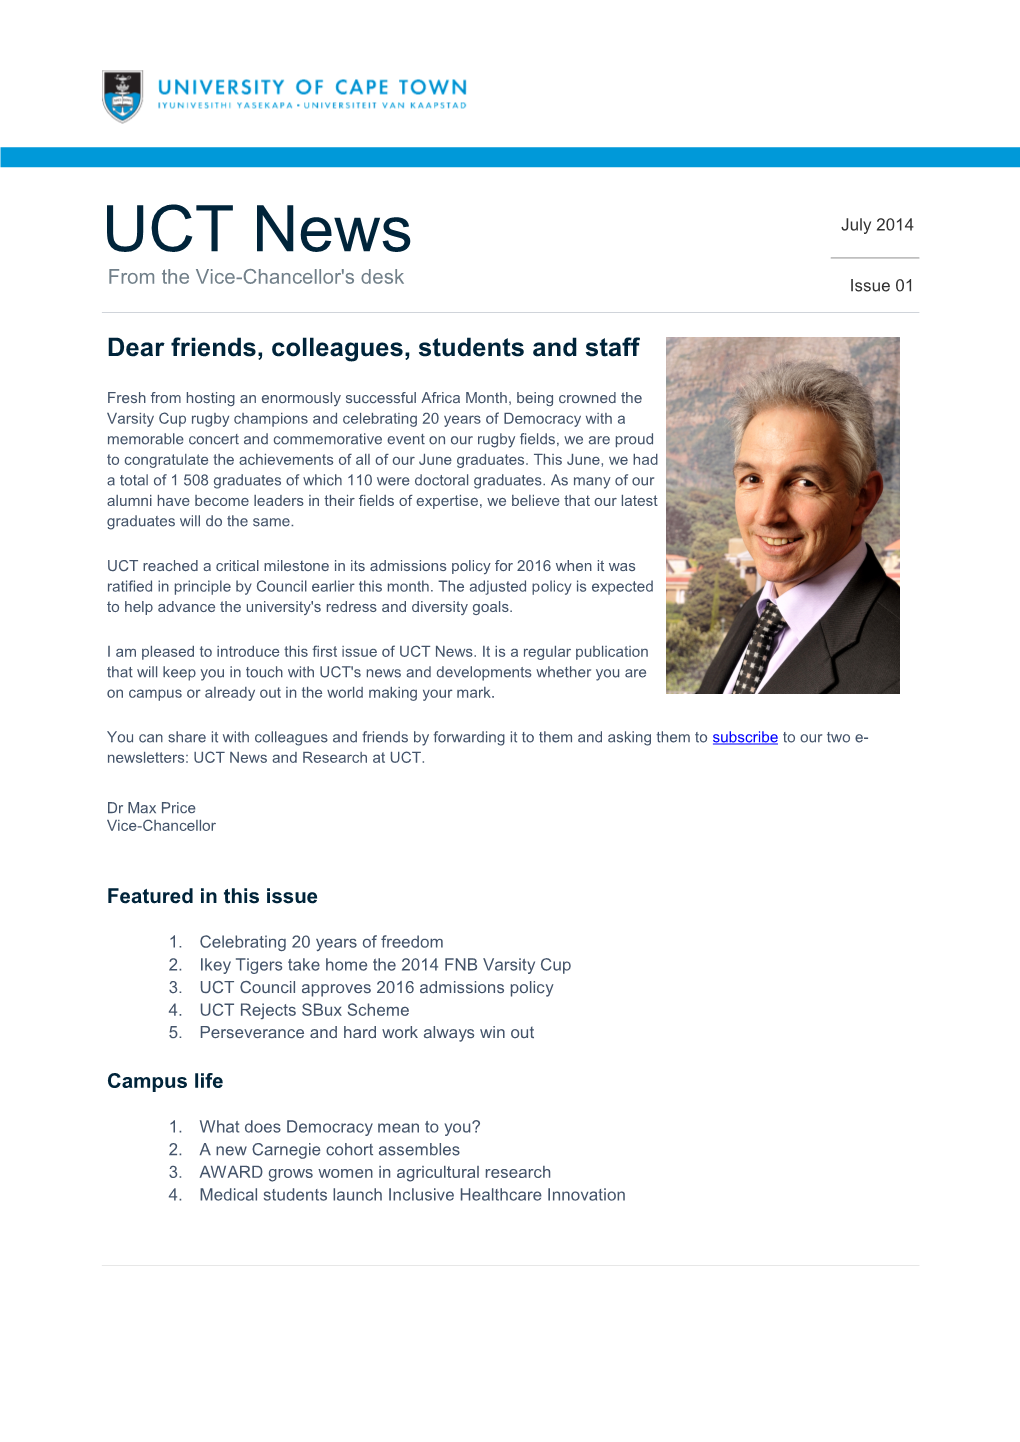 UCT Council Approves 2016 Admissions Policy 4